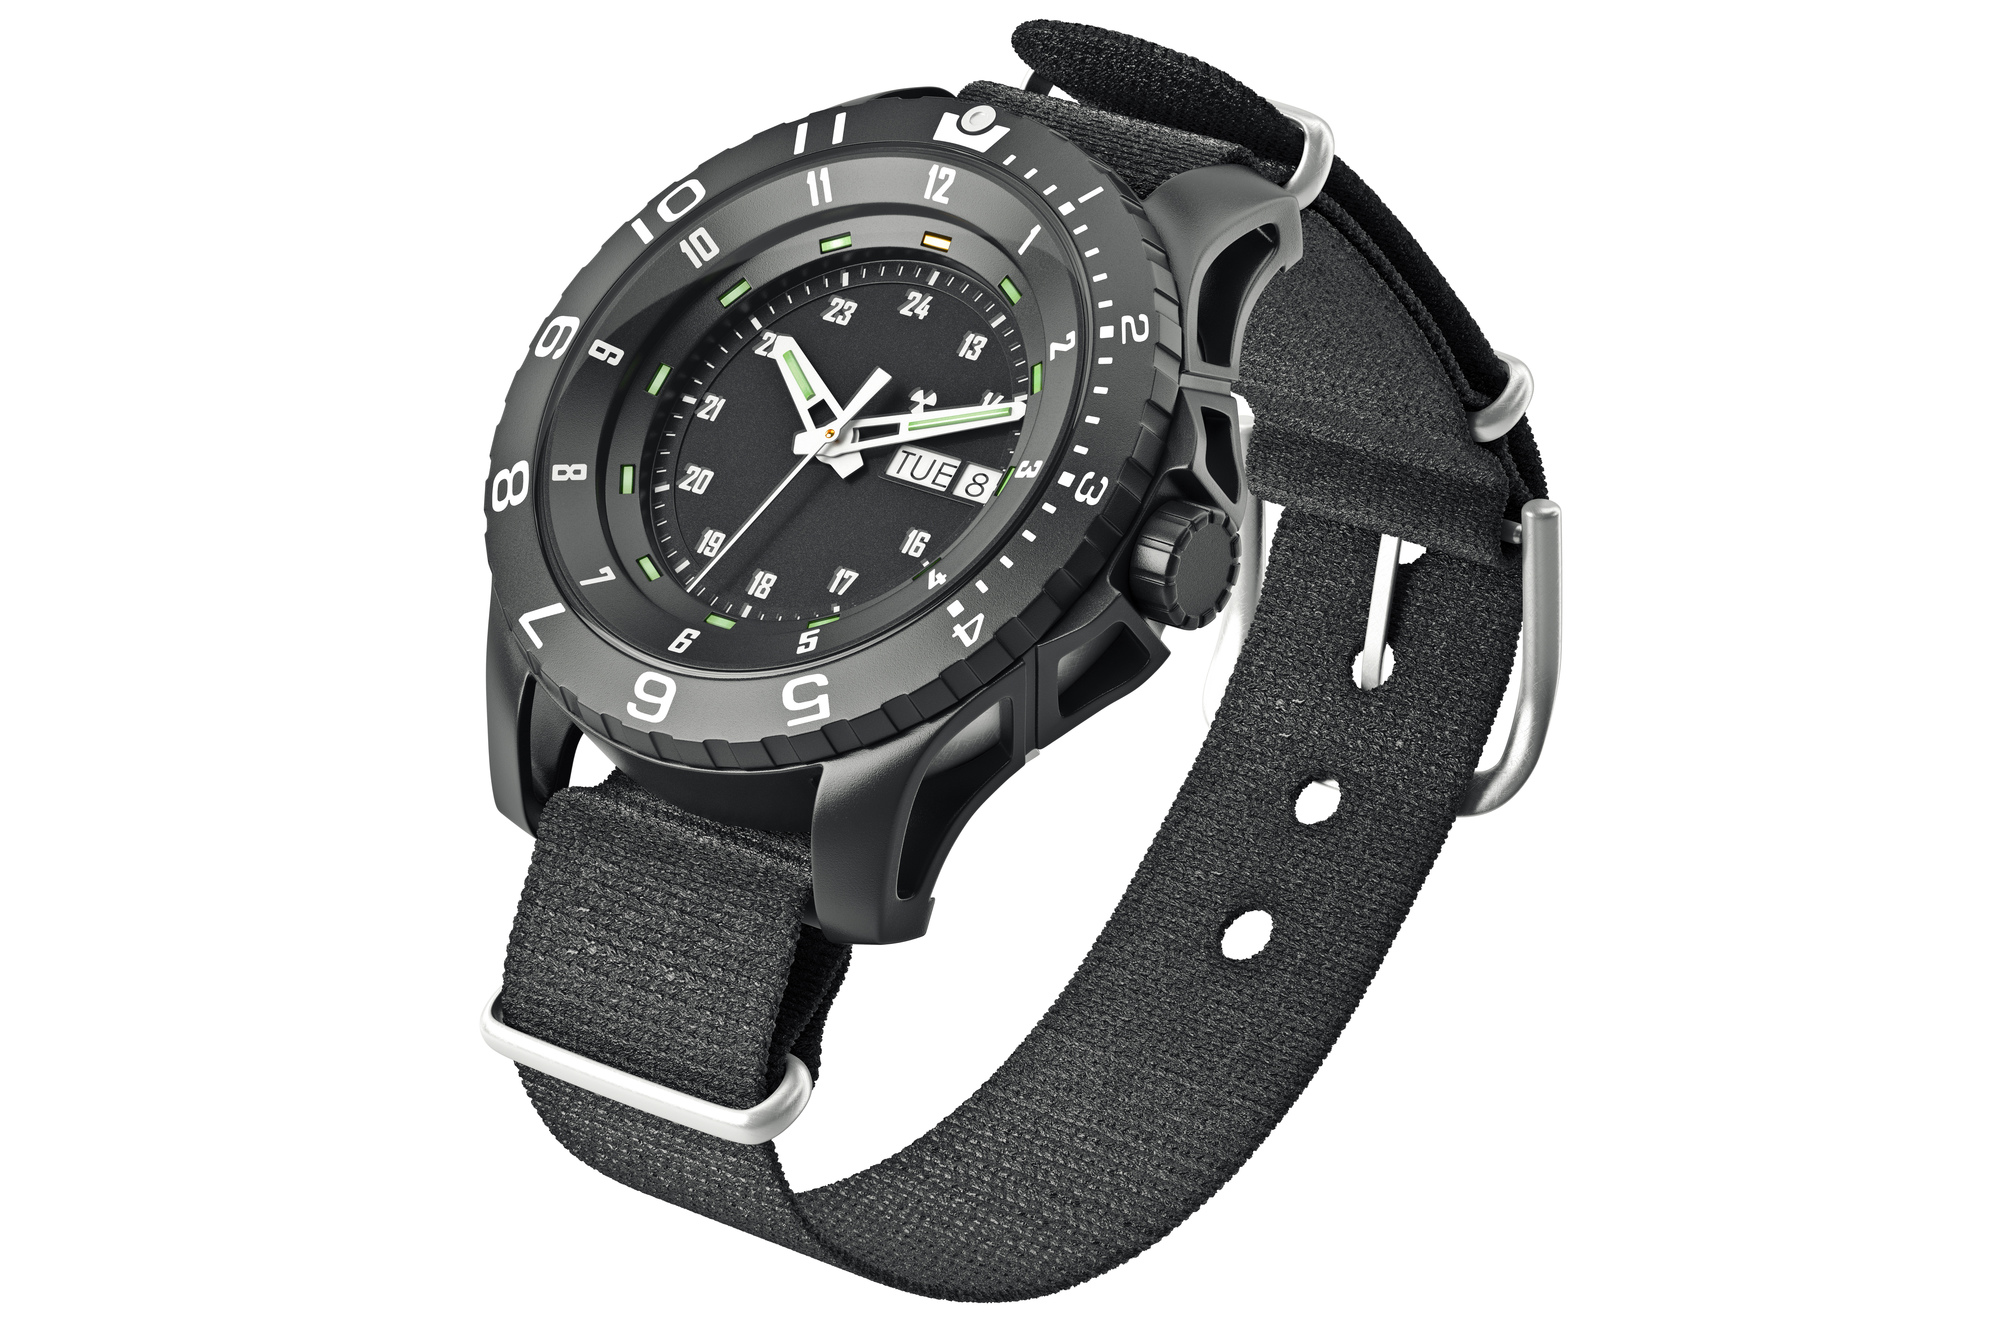 Wrist watch military with textile strap. 3D graphic